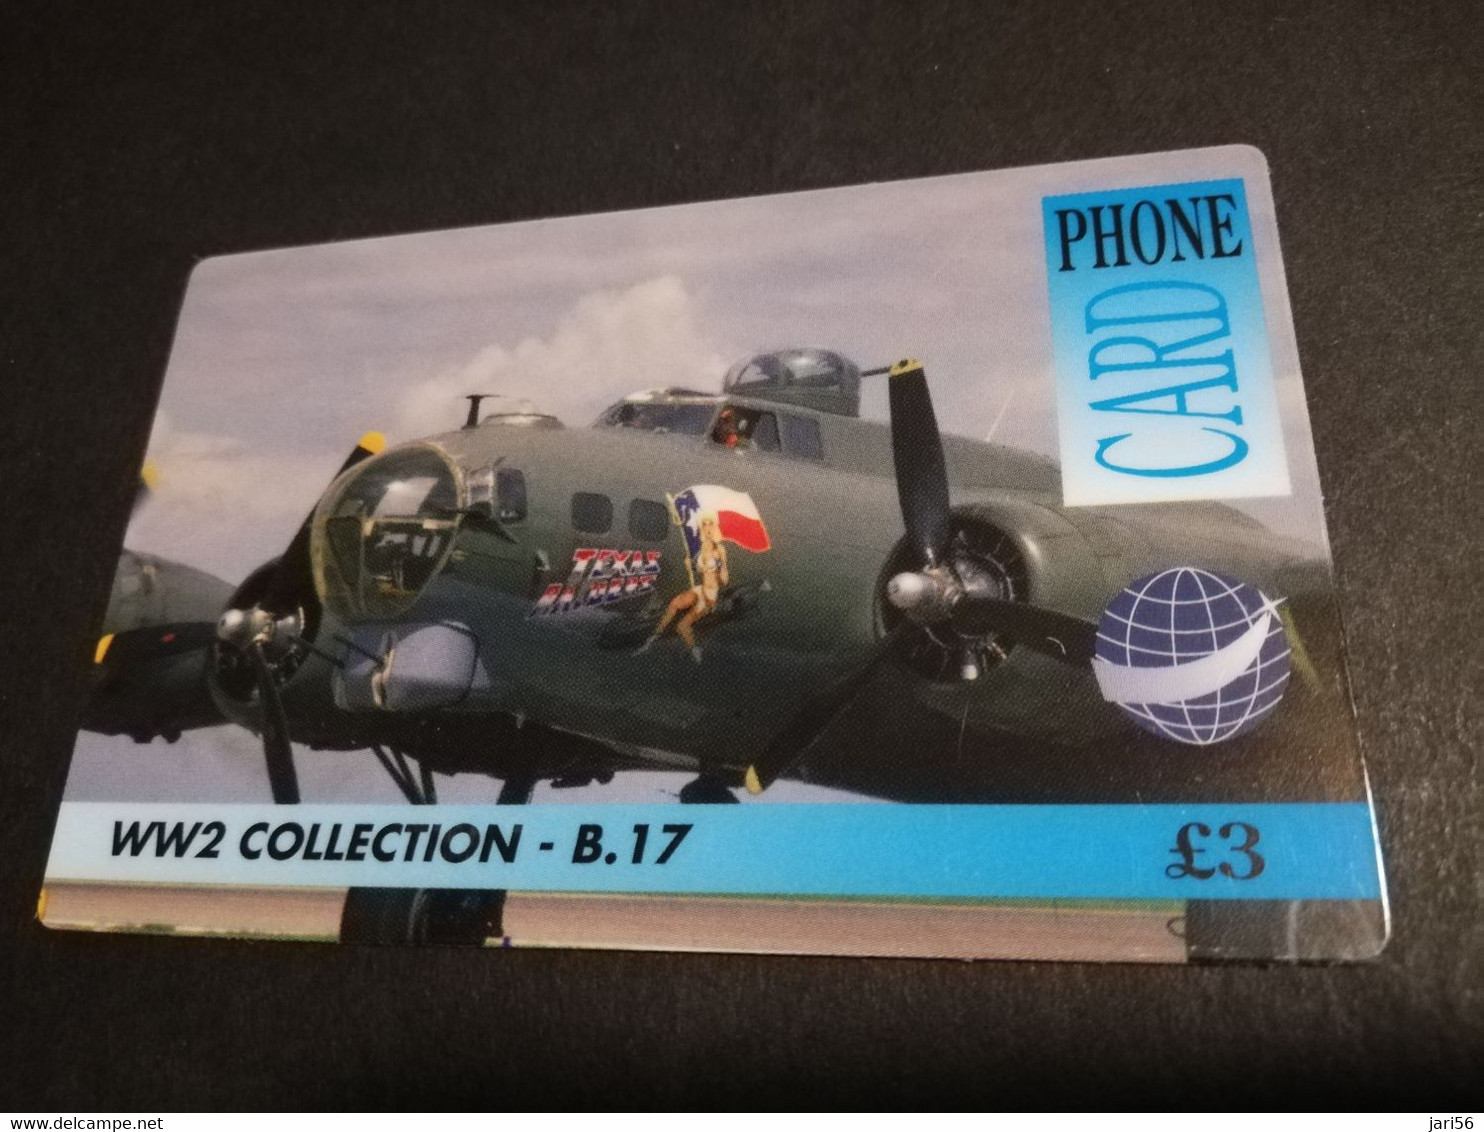 GREAT BRITAIN   3 POUND  AIR PLANES  B-17   DIT PHONECARD    PREPAID CARD      **5917** - Collections